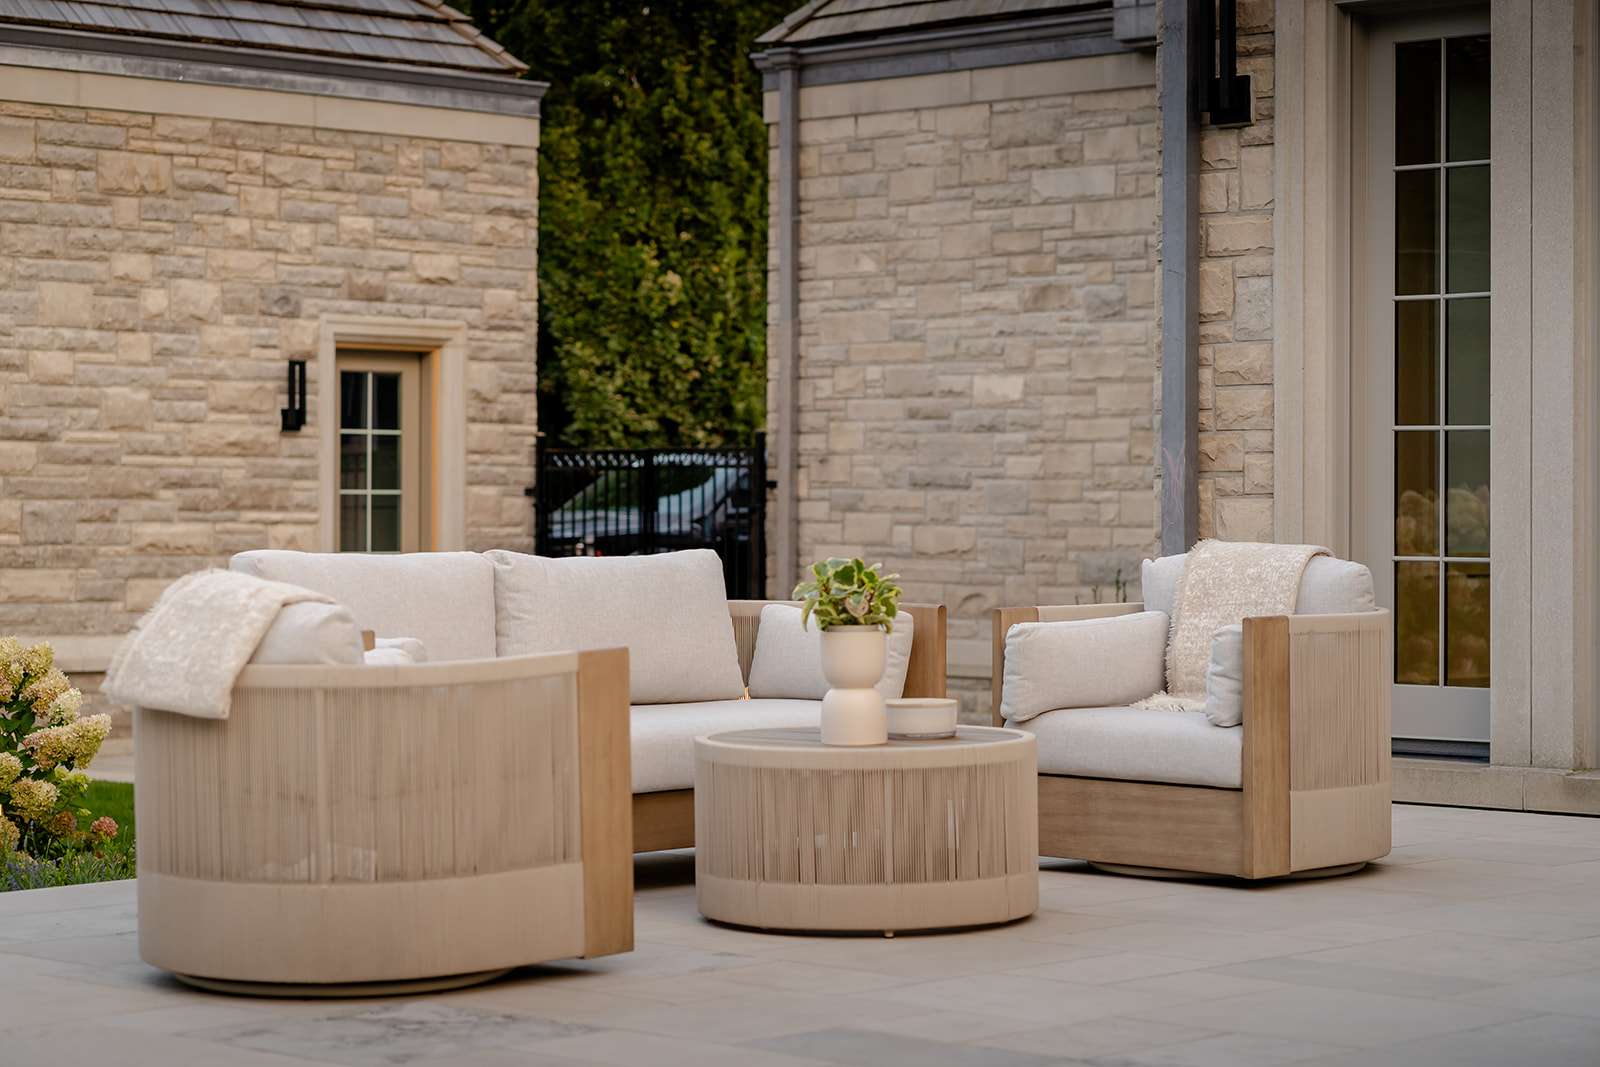 Outdoor furniture in the backyard.